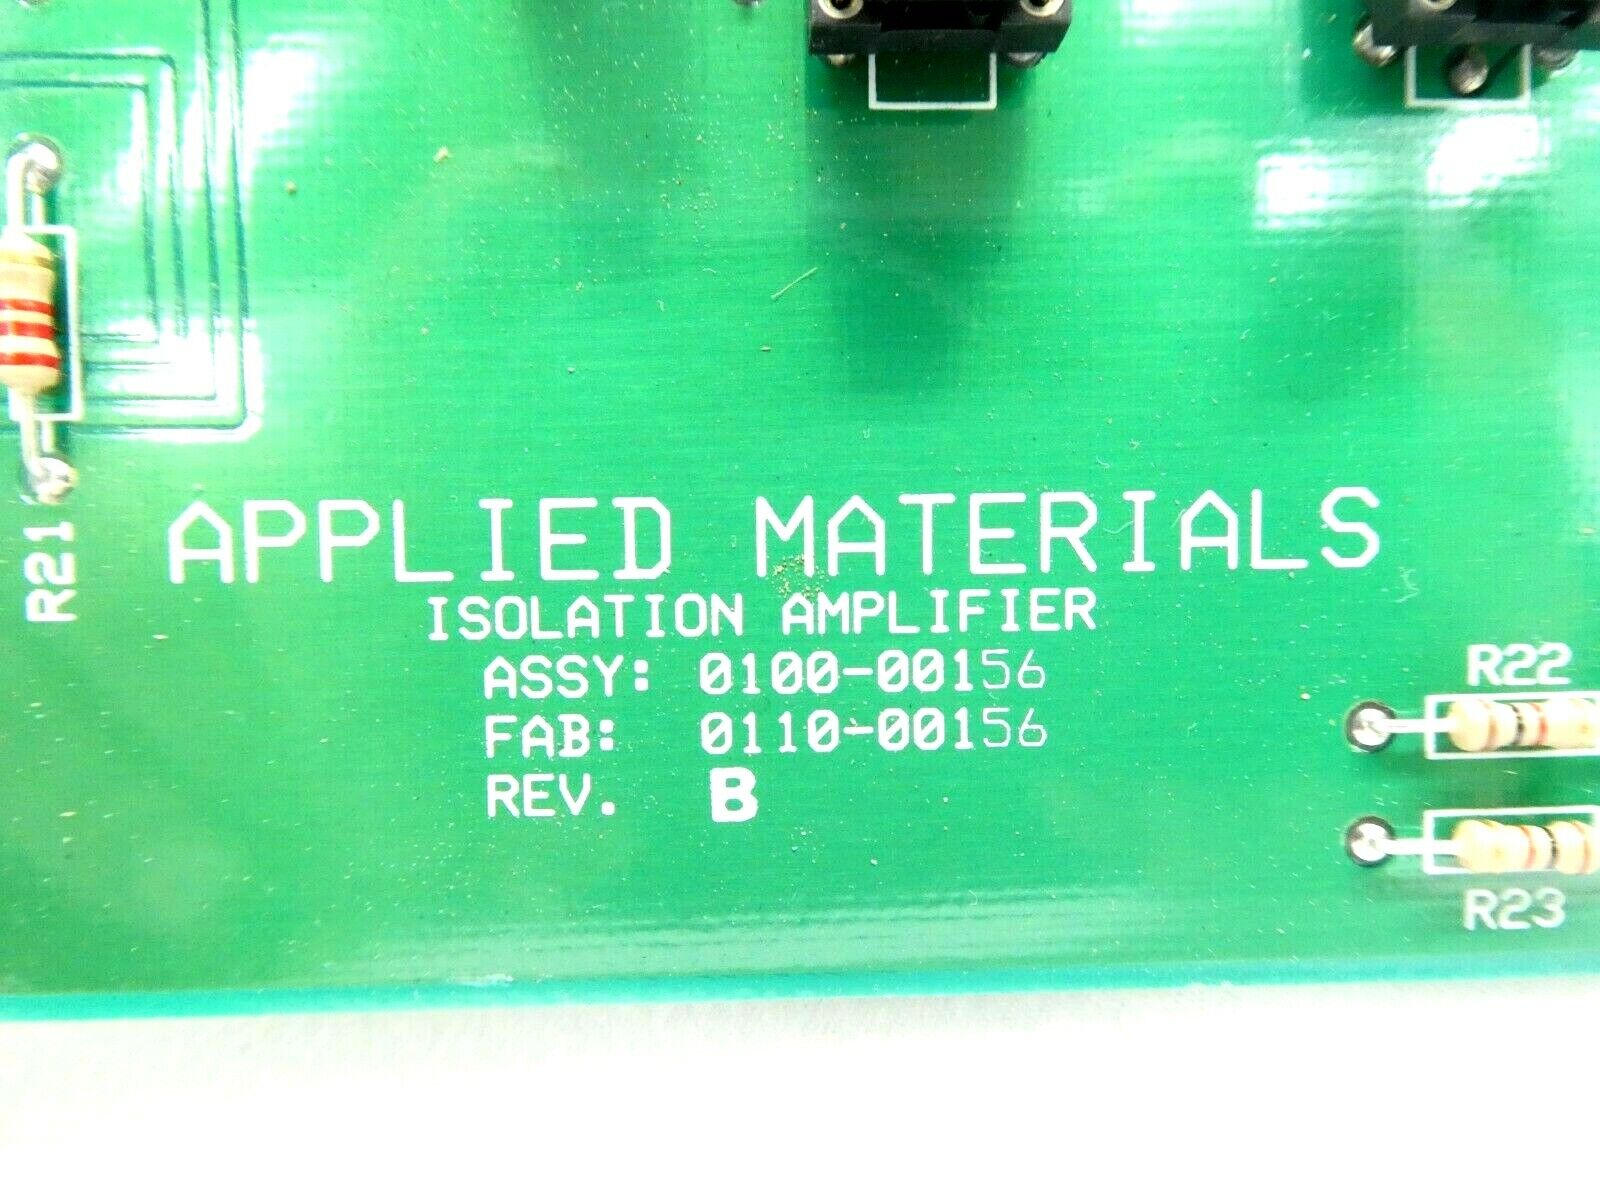 AMAT Applied Materials 0100-00156 Isolation Amplifier PCB Card Rev. B Working